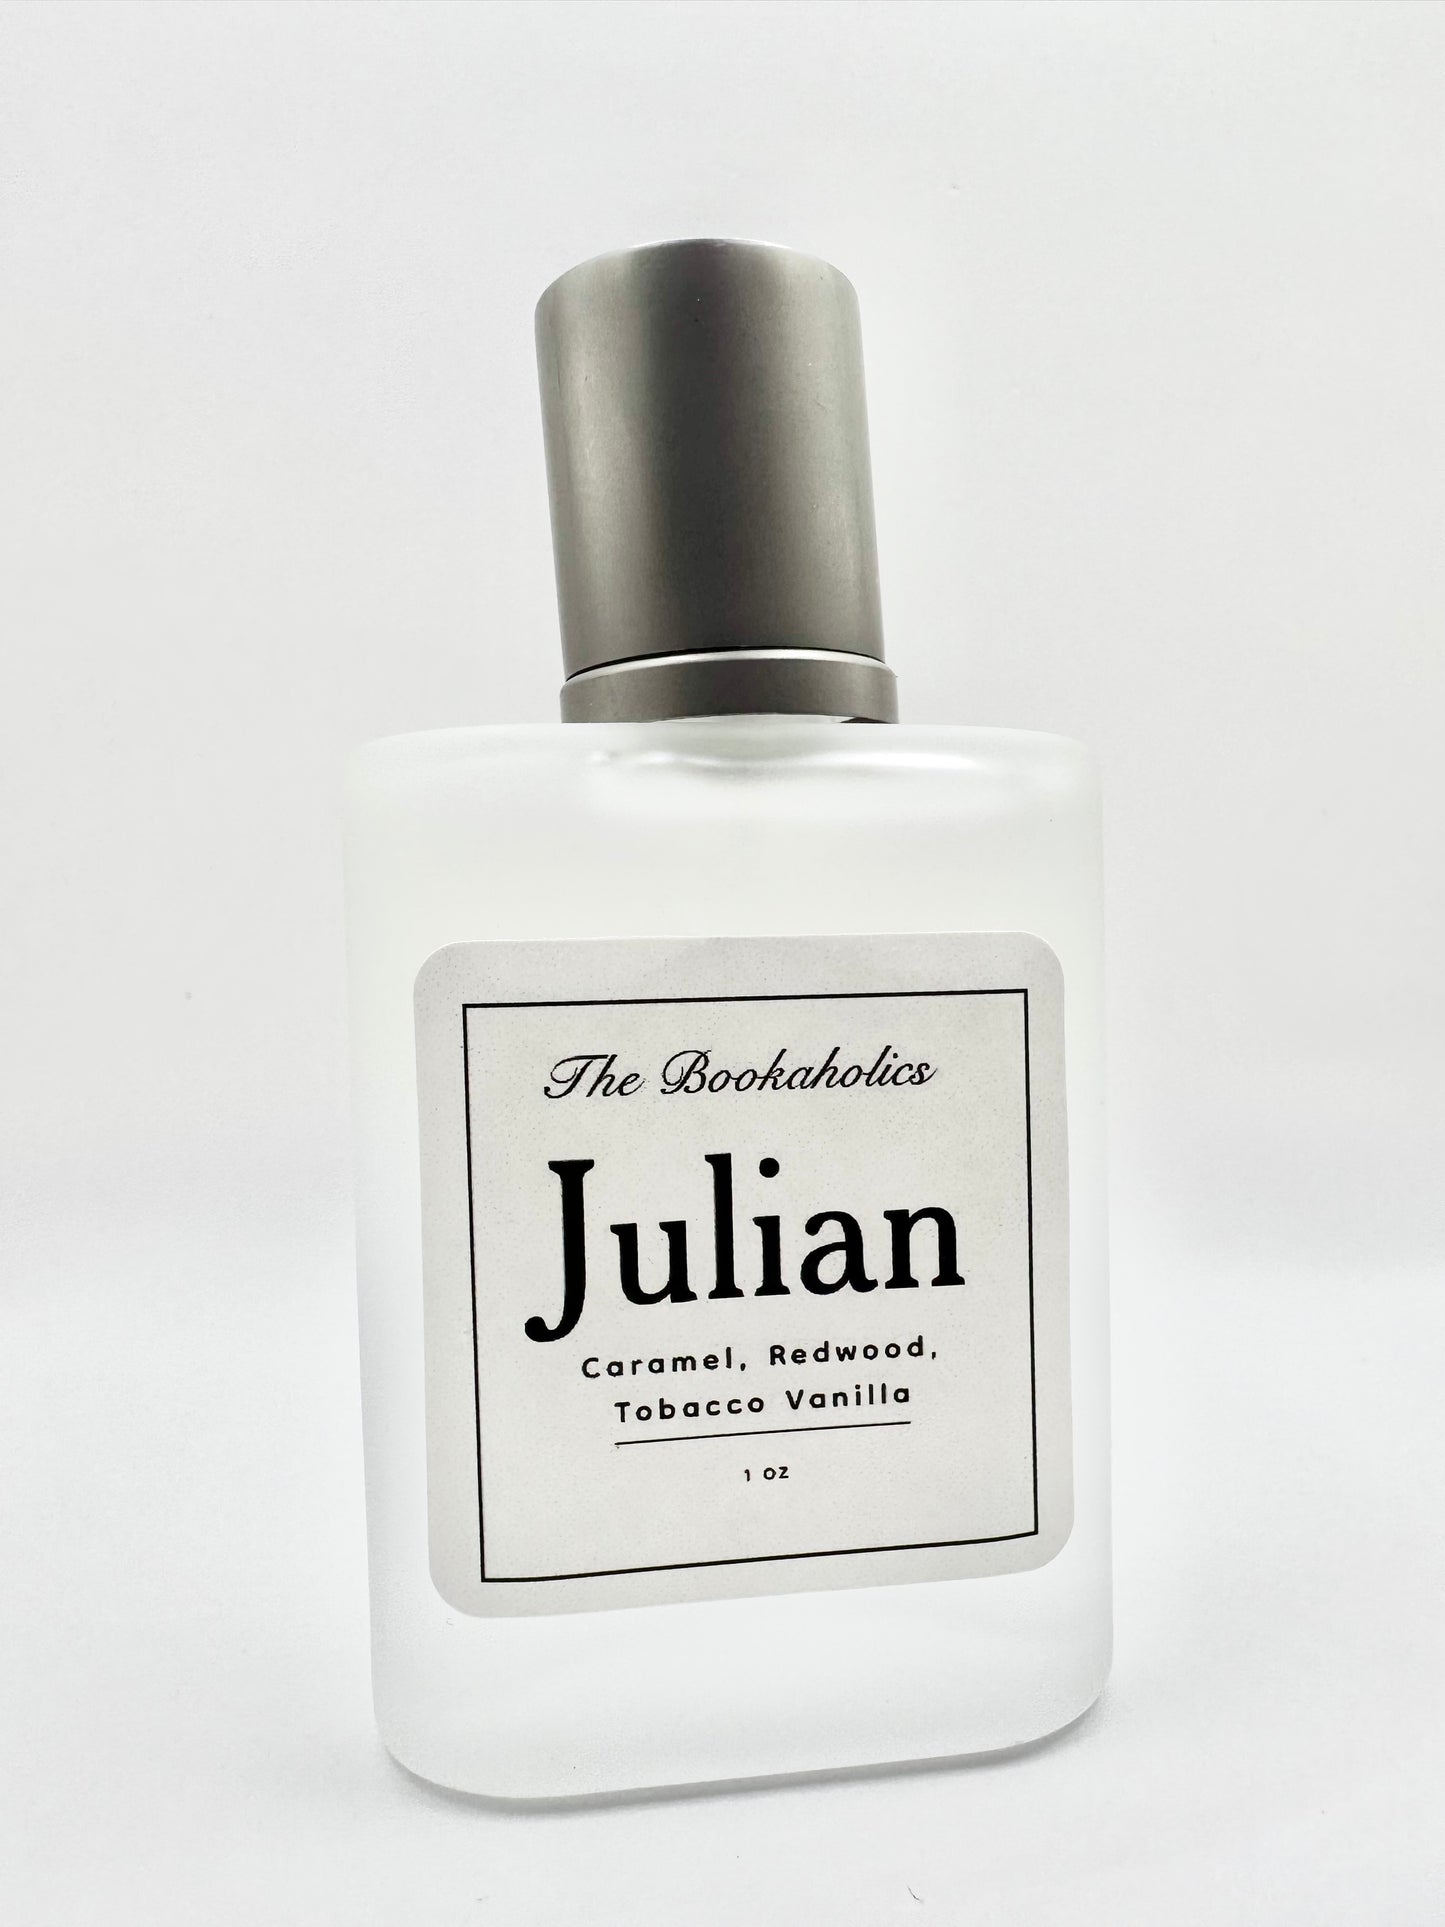 Julian: Cologne inspired by Julian from the Caraval series